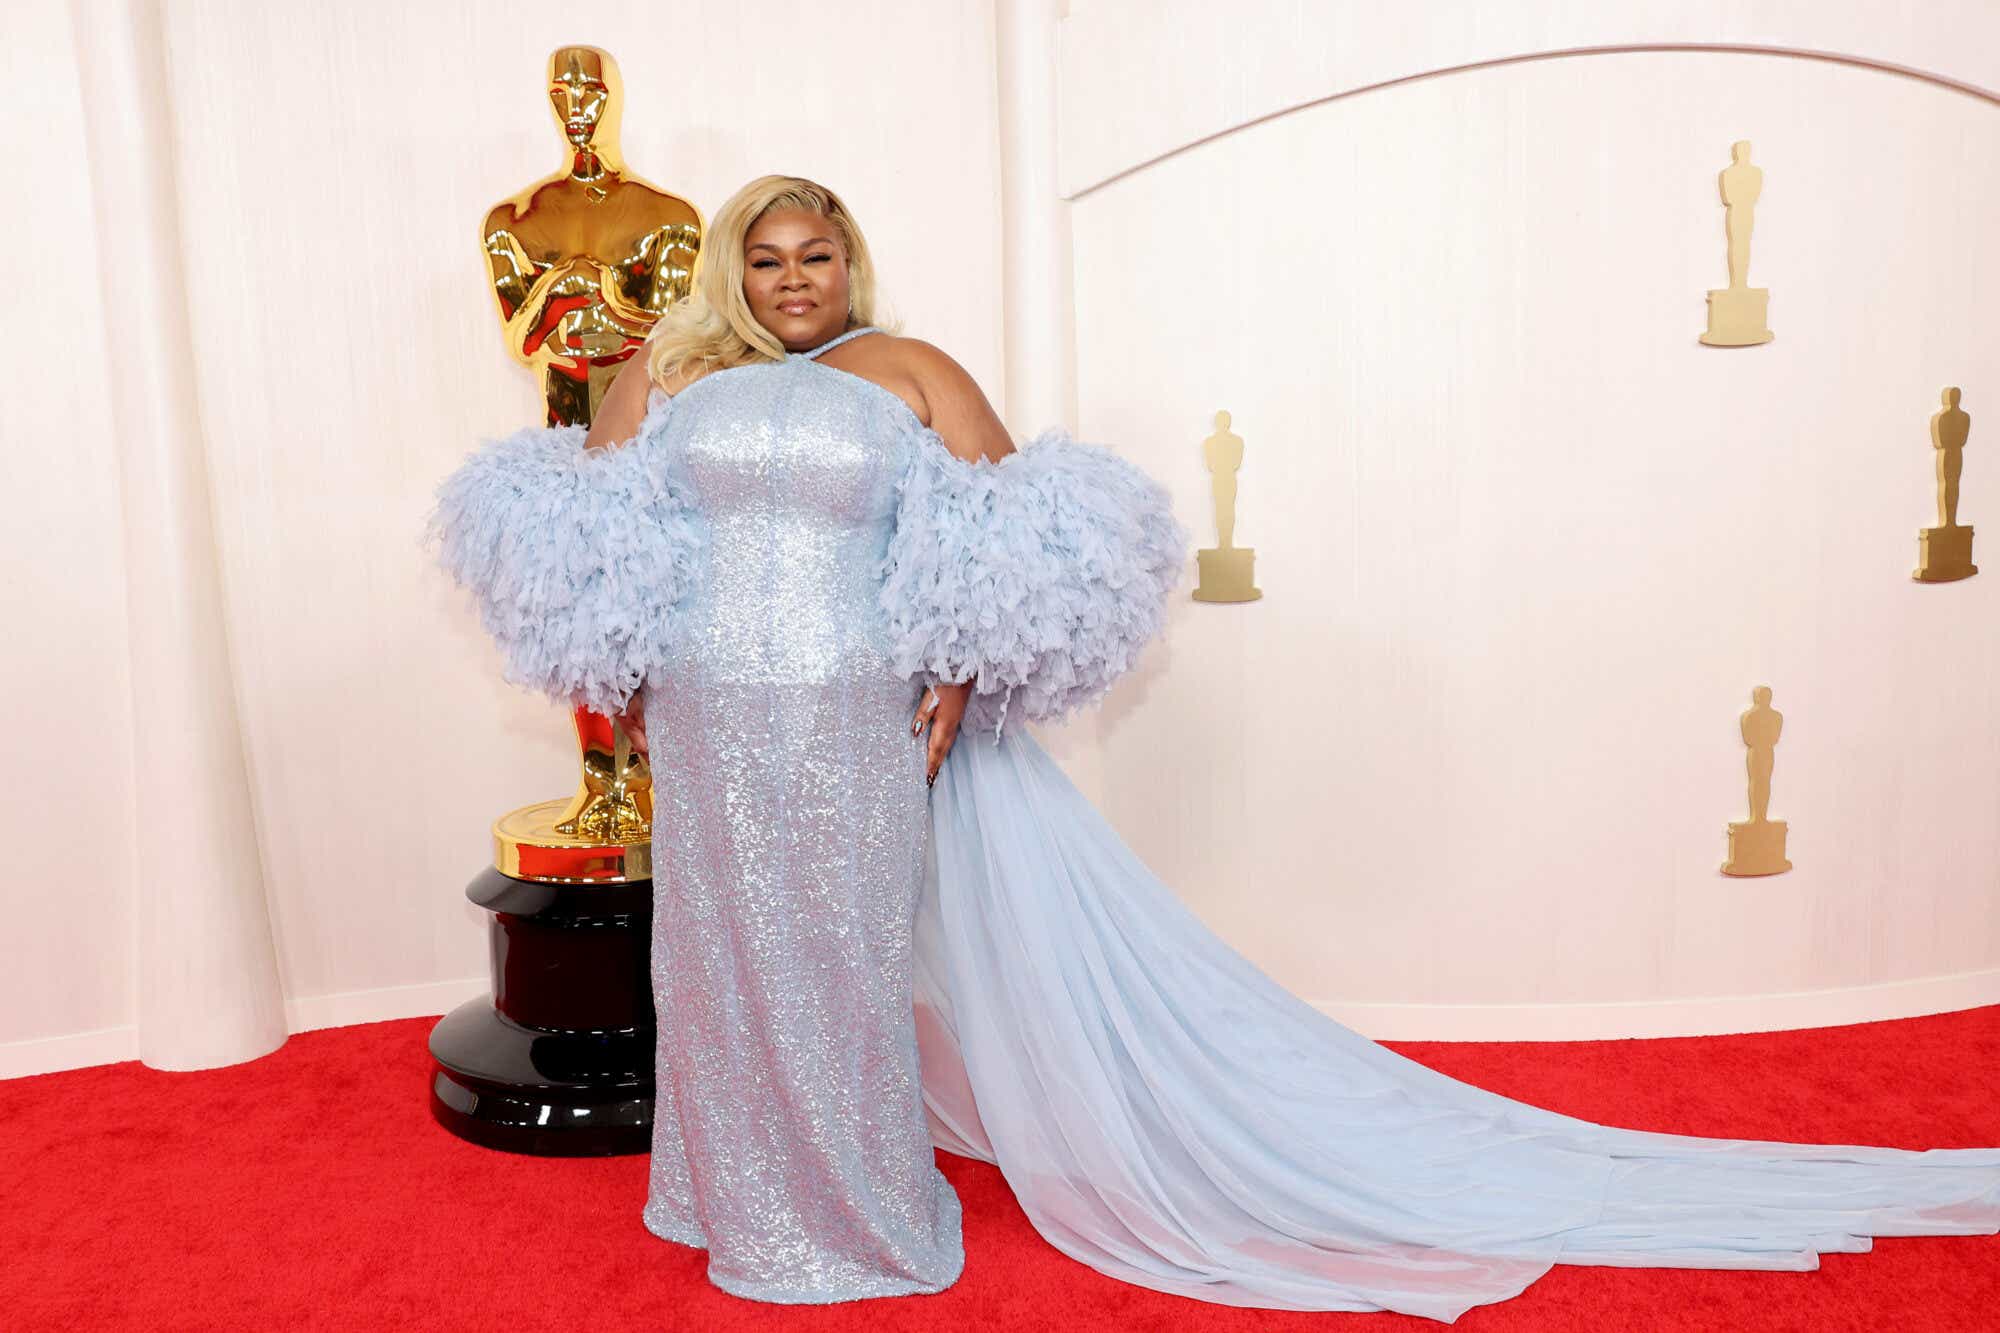 Da'Vine Joy Randolph wears a light blue sequined gown with ruffled sleeves and a long train to the Oscars.